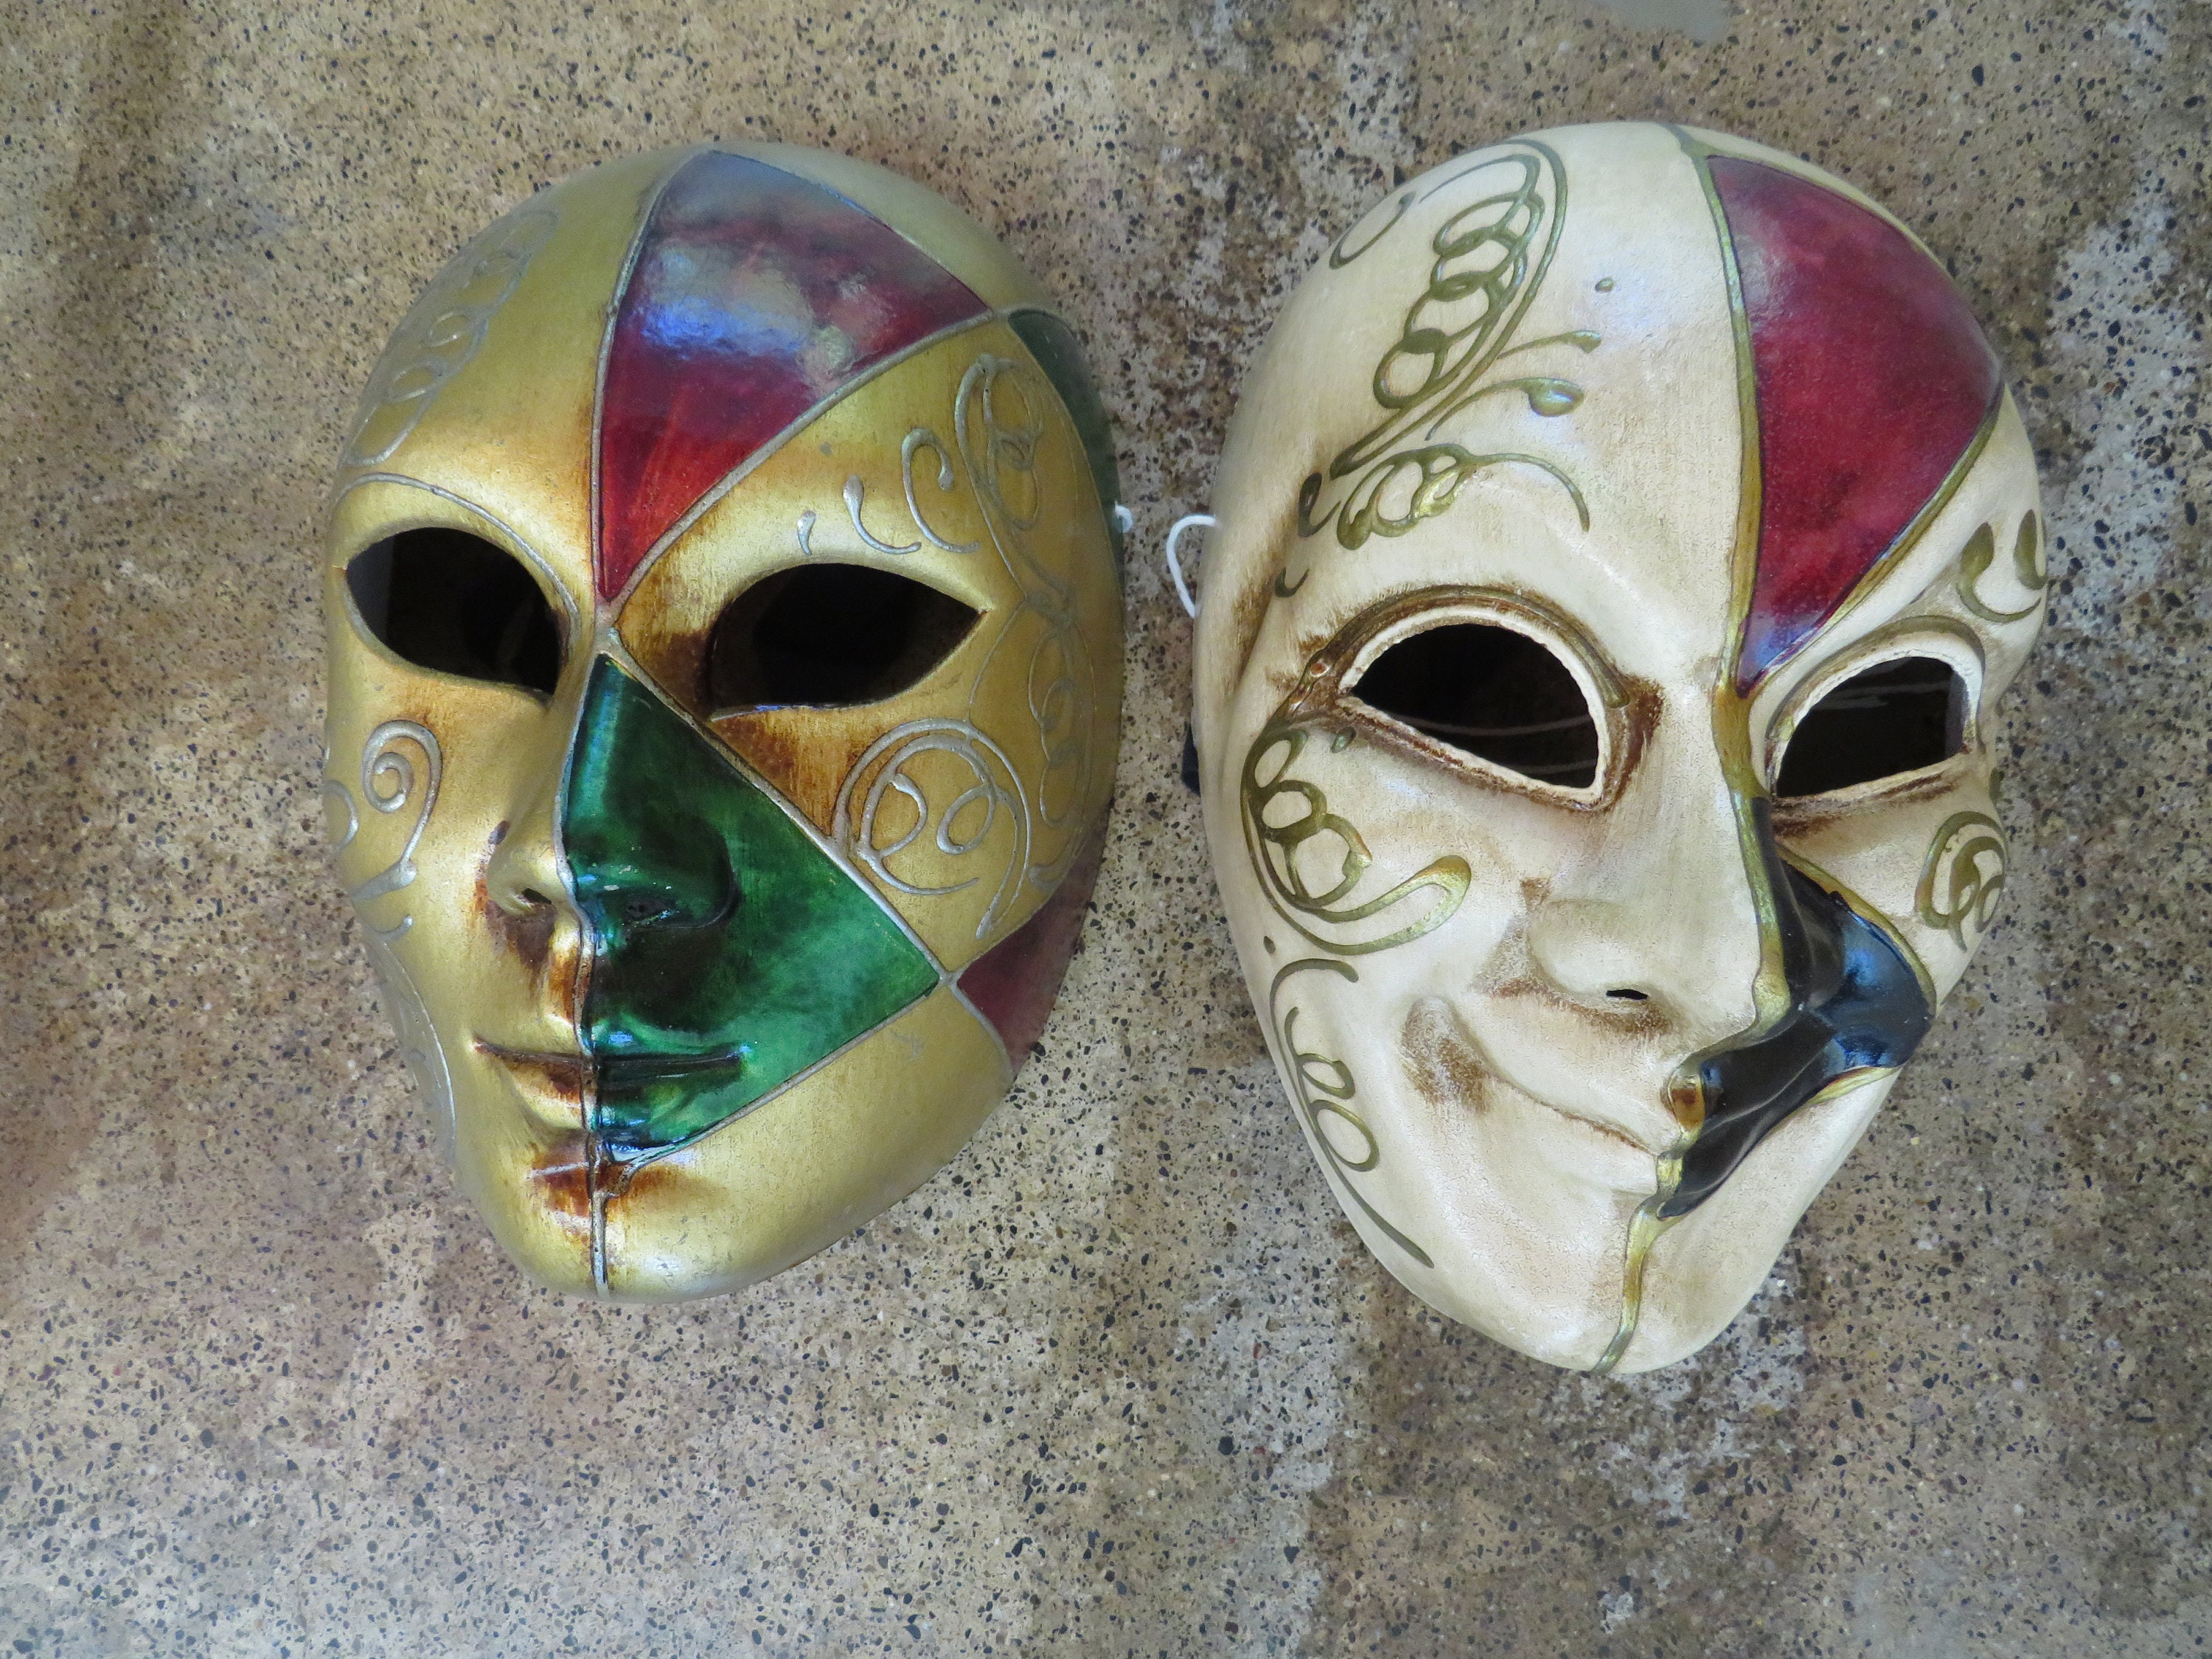 Laguna Hand Painted Masks Made in Italy Set of 2 Masks Venice Tourist Art  Home Decor Art Wall Hanging Italian Costume Party Venice Europe 